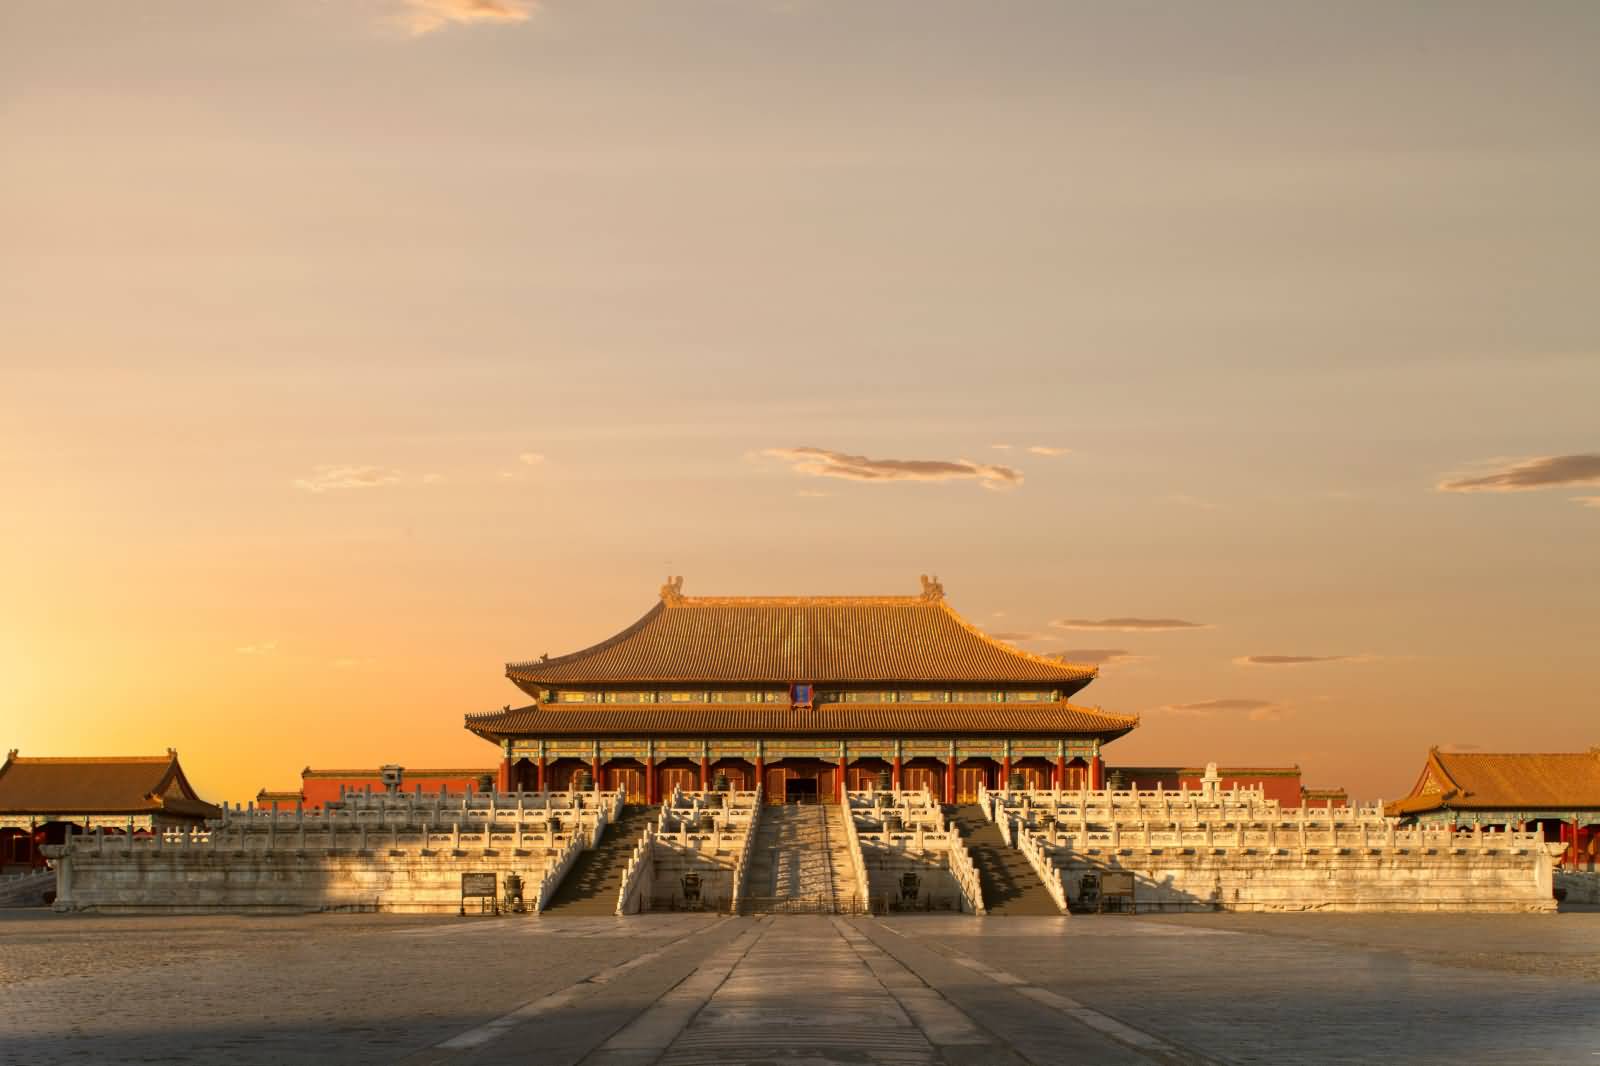 The Forbidden City In Beijing, China During Sunset